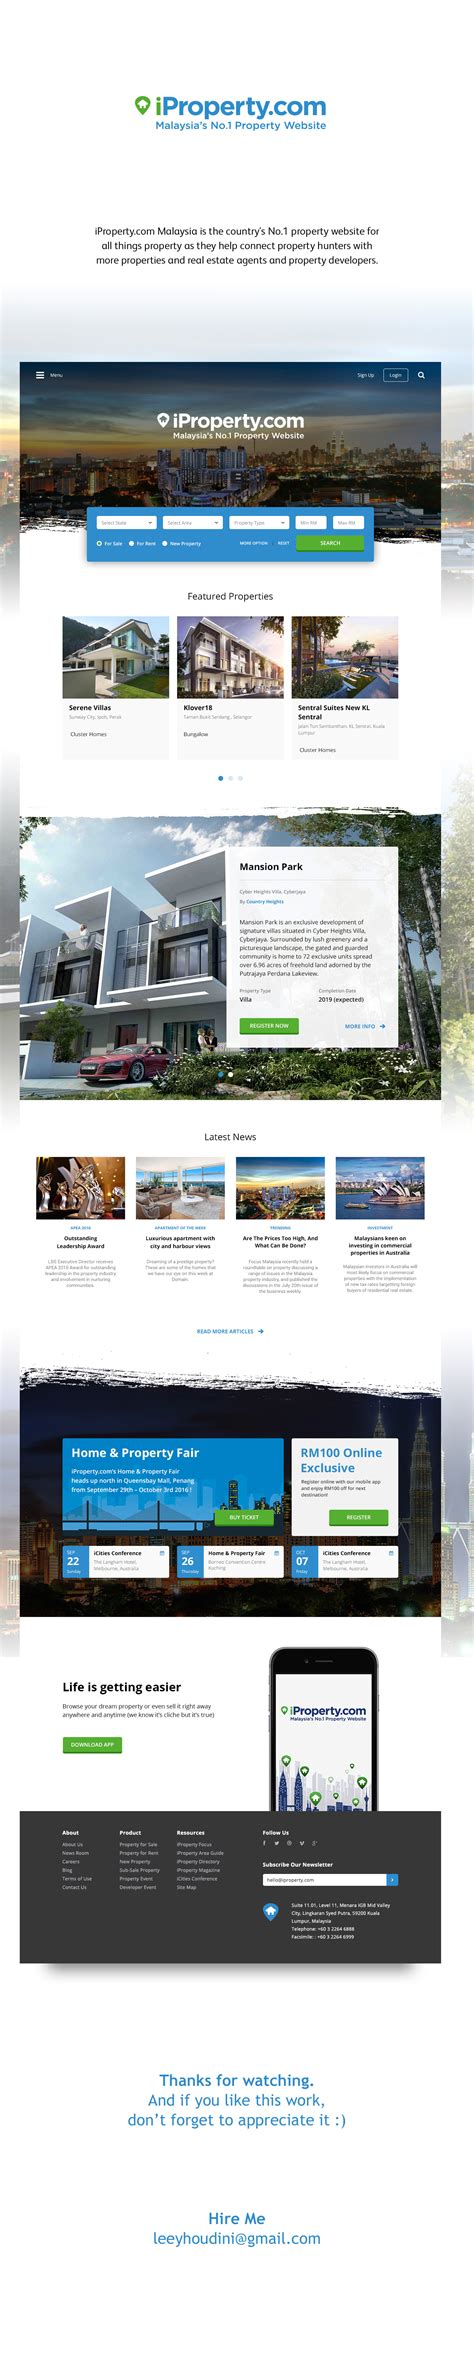 check-out-my-@behance-project-iproperty-com-website-redesign-website-redesign,-redesign